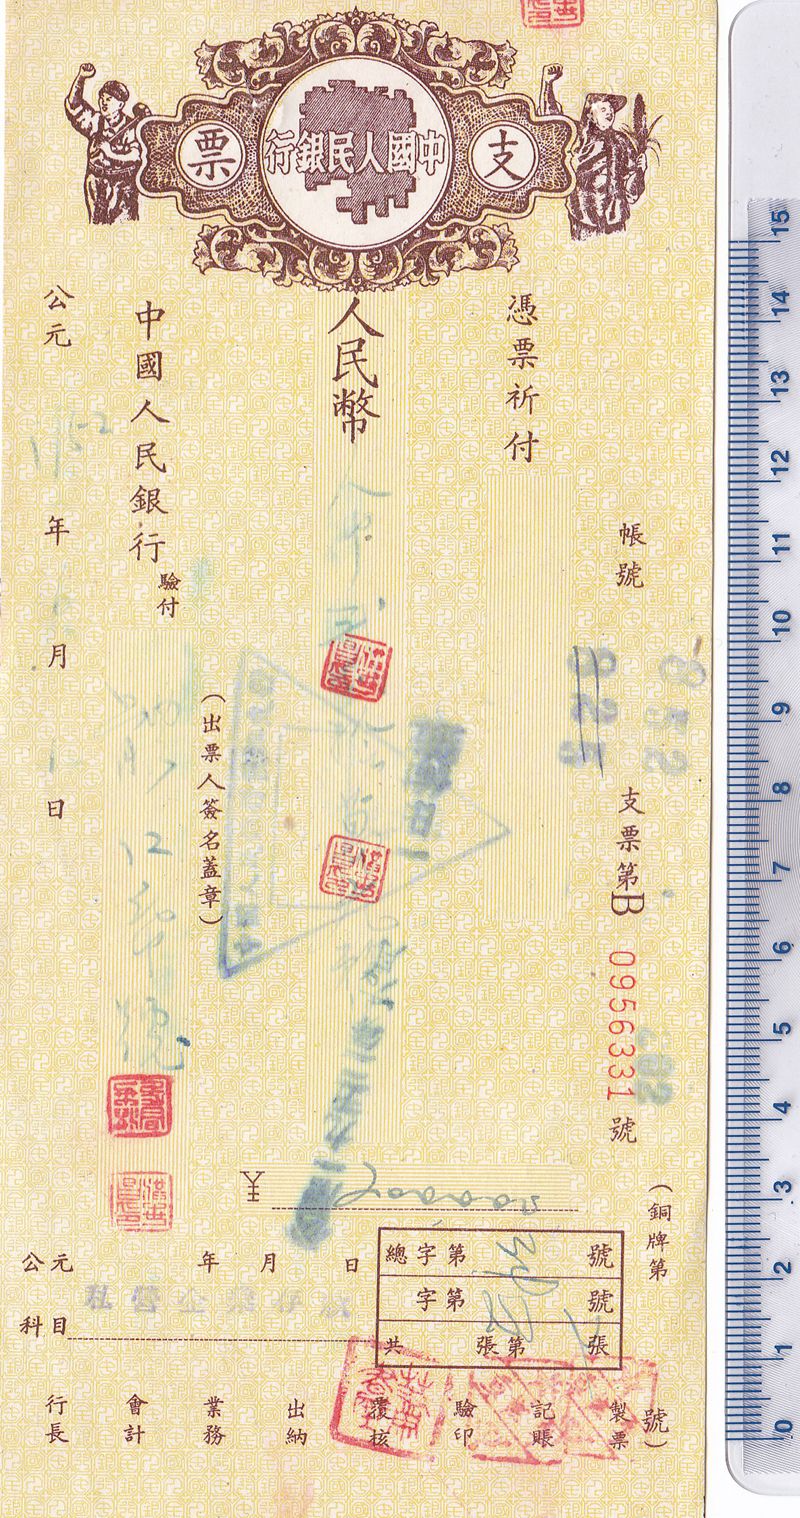 D1104, People's Bank of China, Check Cheque of 1952